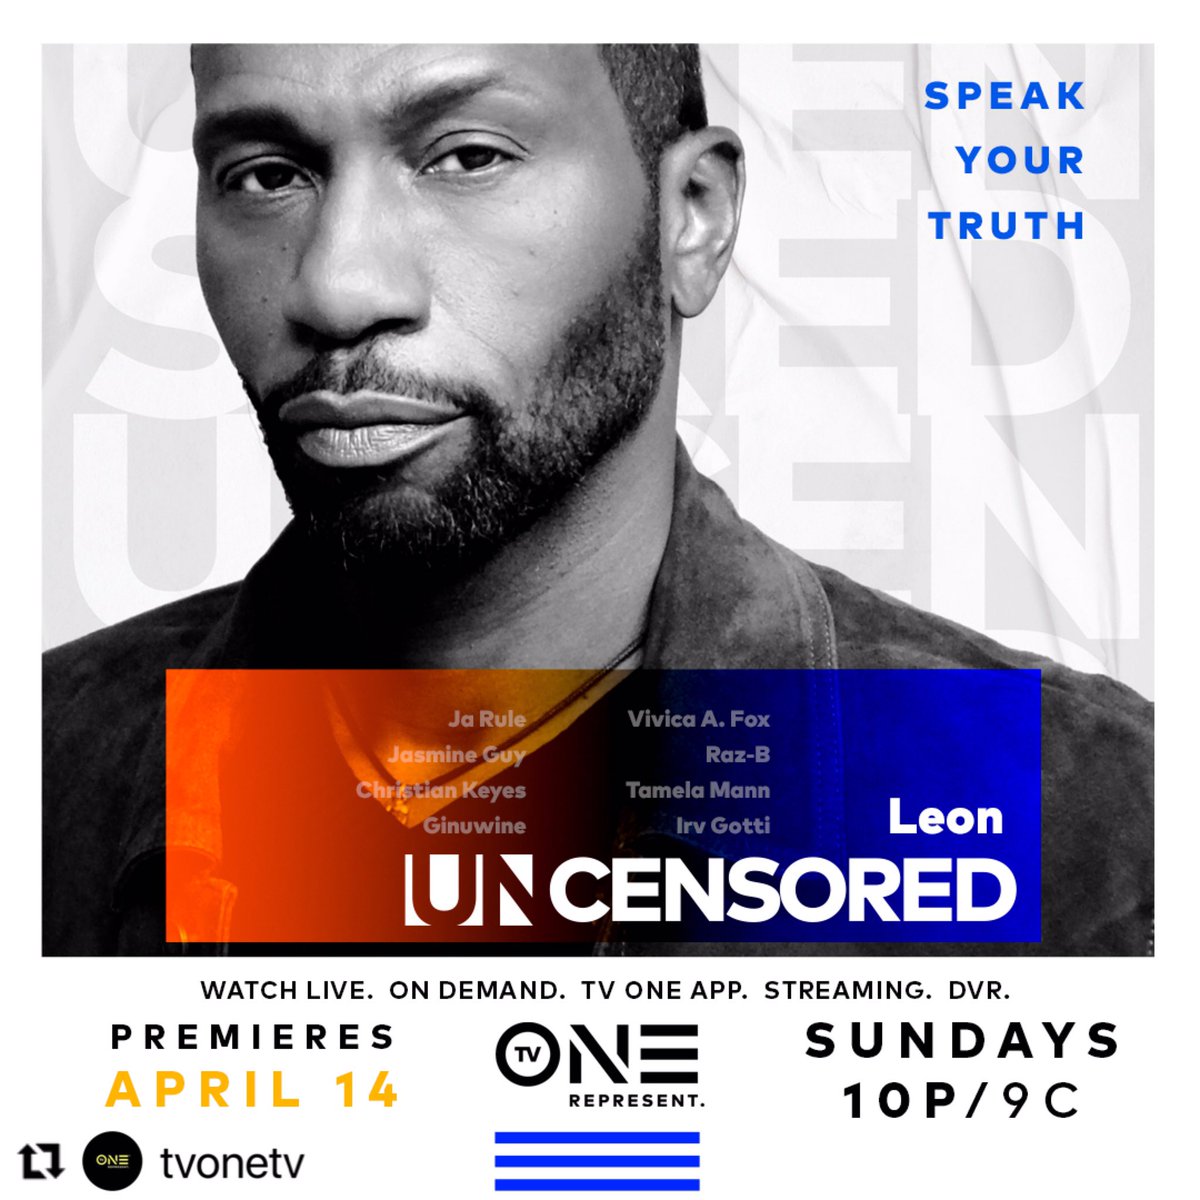 You know his name, but you don’t know his story. An all-new #Uncensored featuring @wwwjustleon premieres Sunday at 10p/9c, only on @tvonetv. 🎥🍿